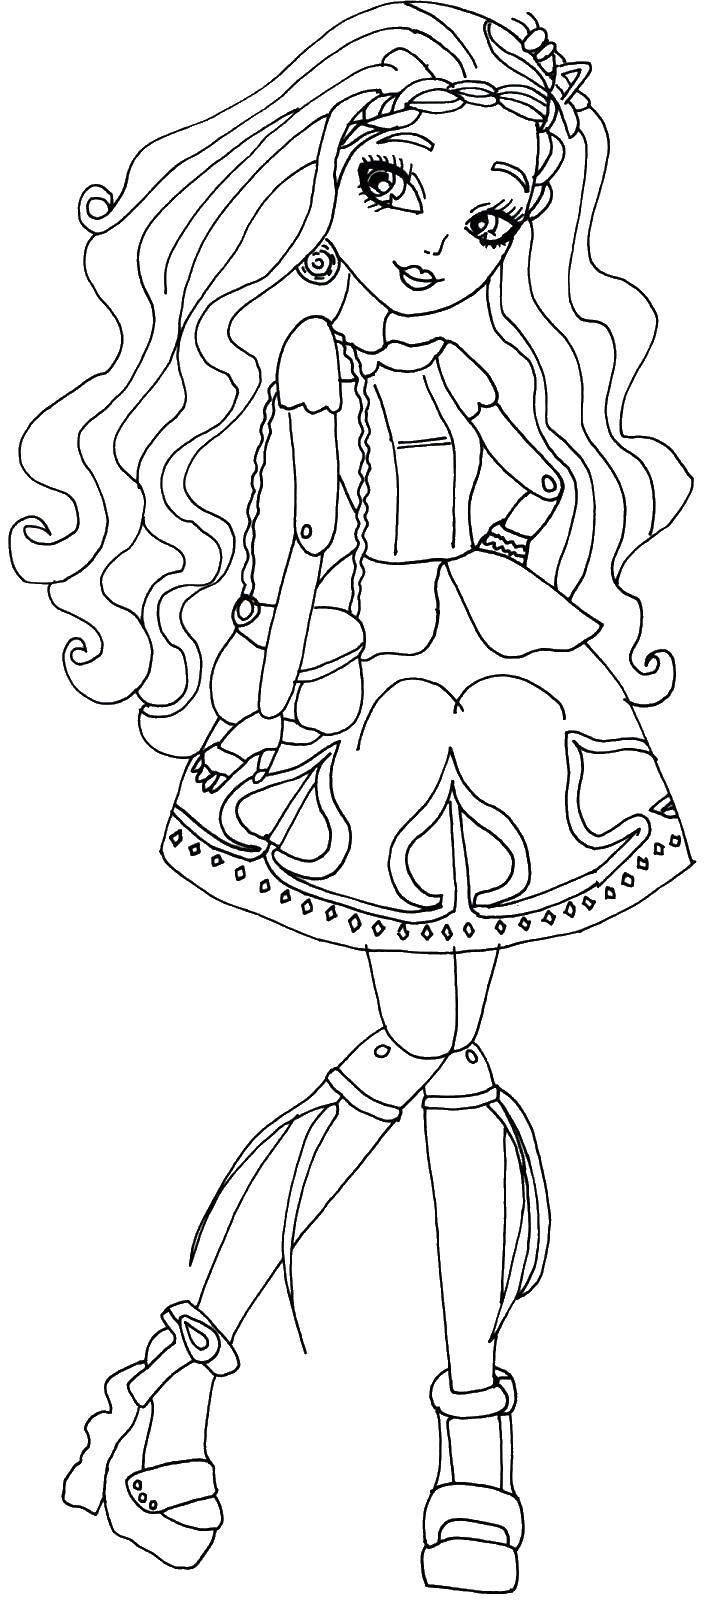 Coloring Cedar wood daughter of Pinocchio. Category eah school. Tags:  ever after high, Cedar wood, Pinocchio.